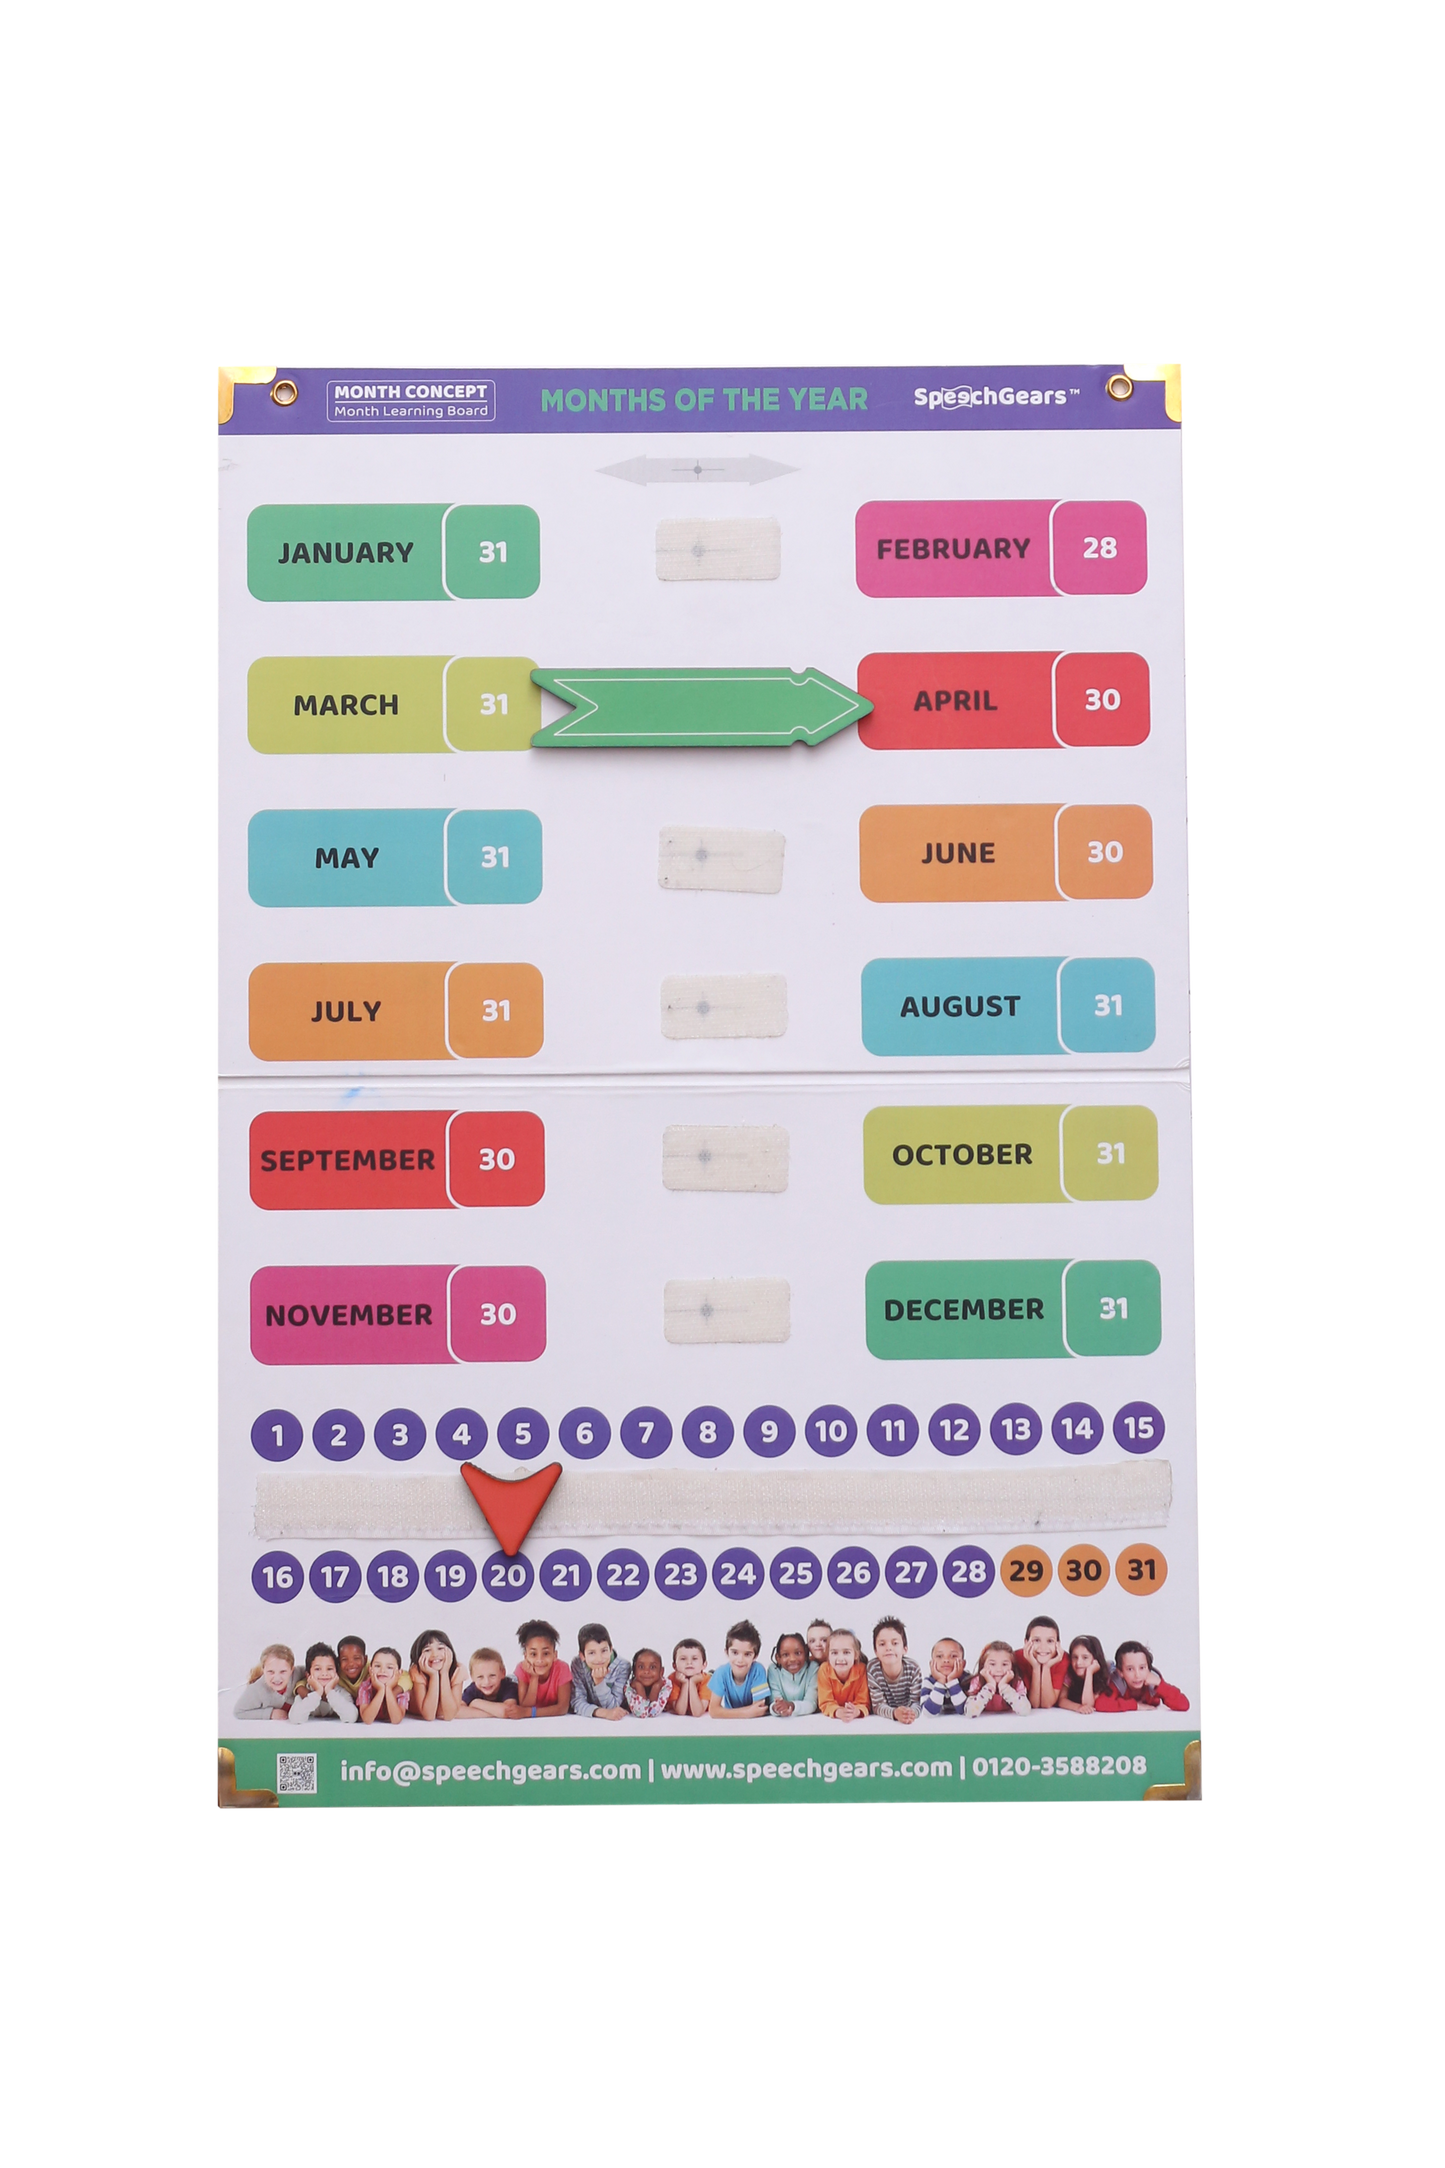 Day Concept® with Day Learning Board 1.0